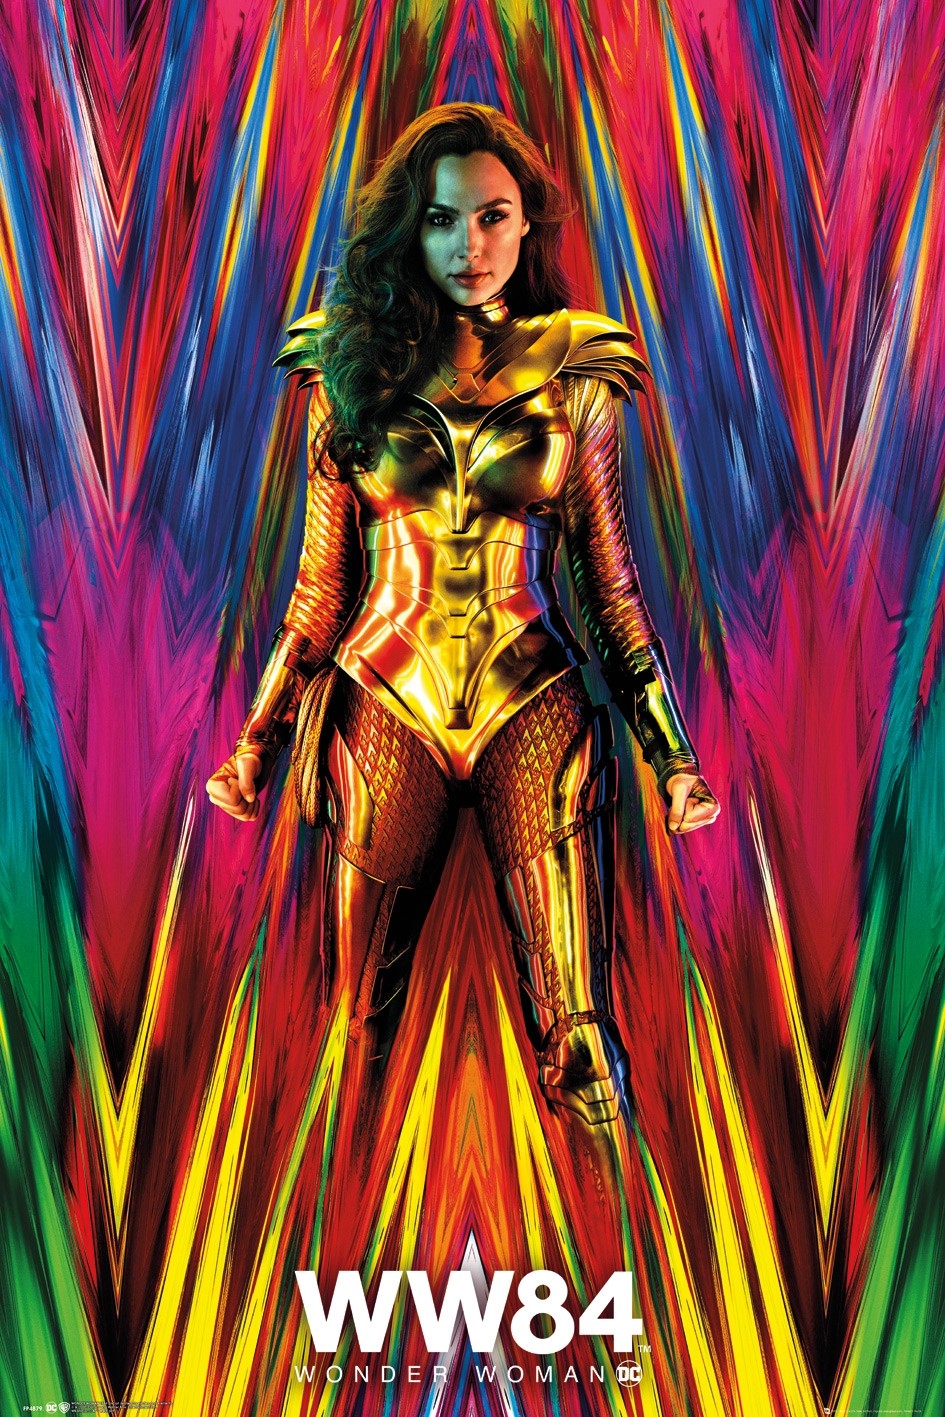 Wonder Woman 84 Colorful Poster Wallpapers